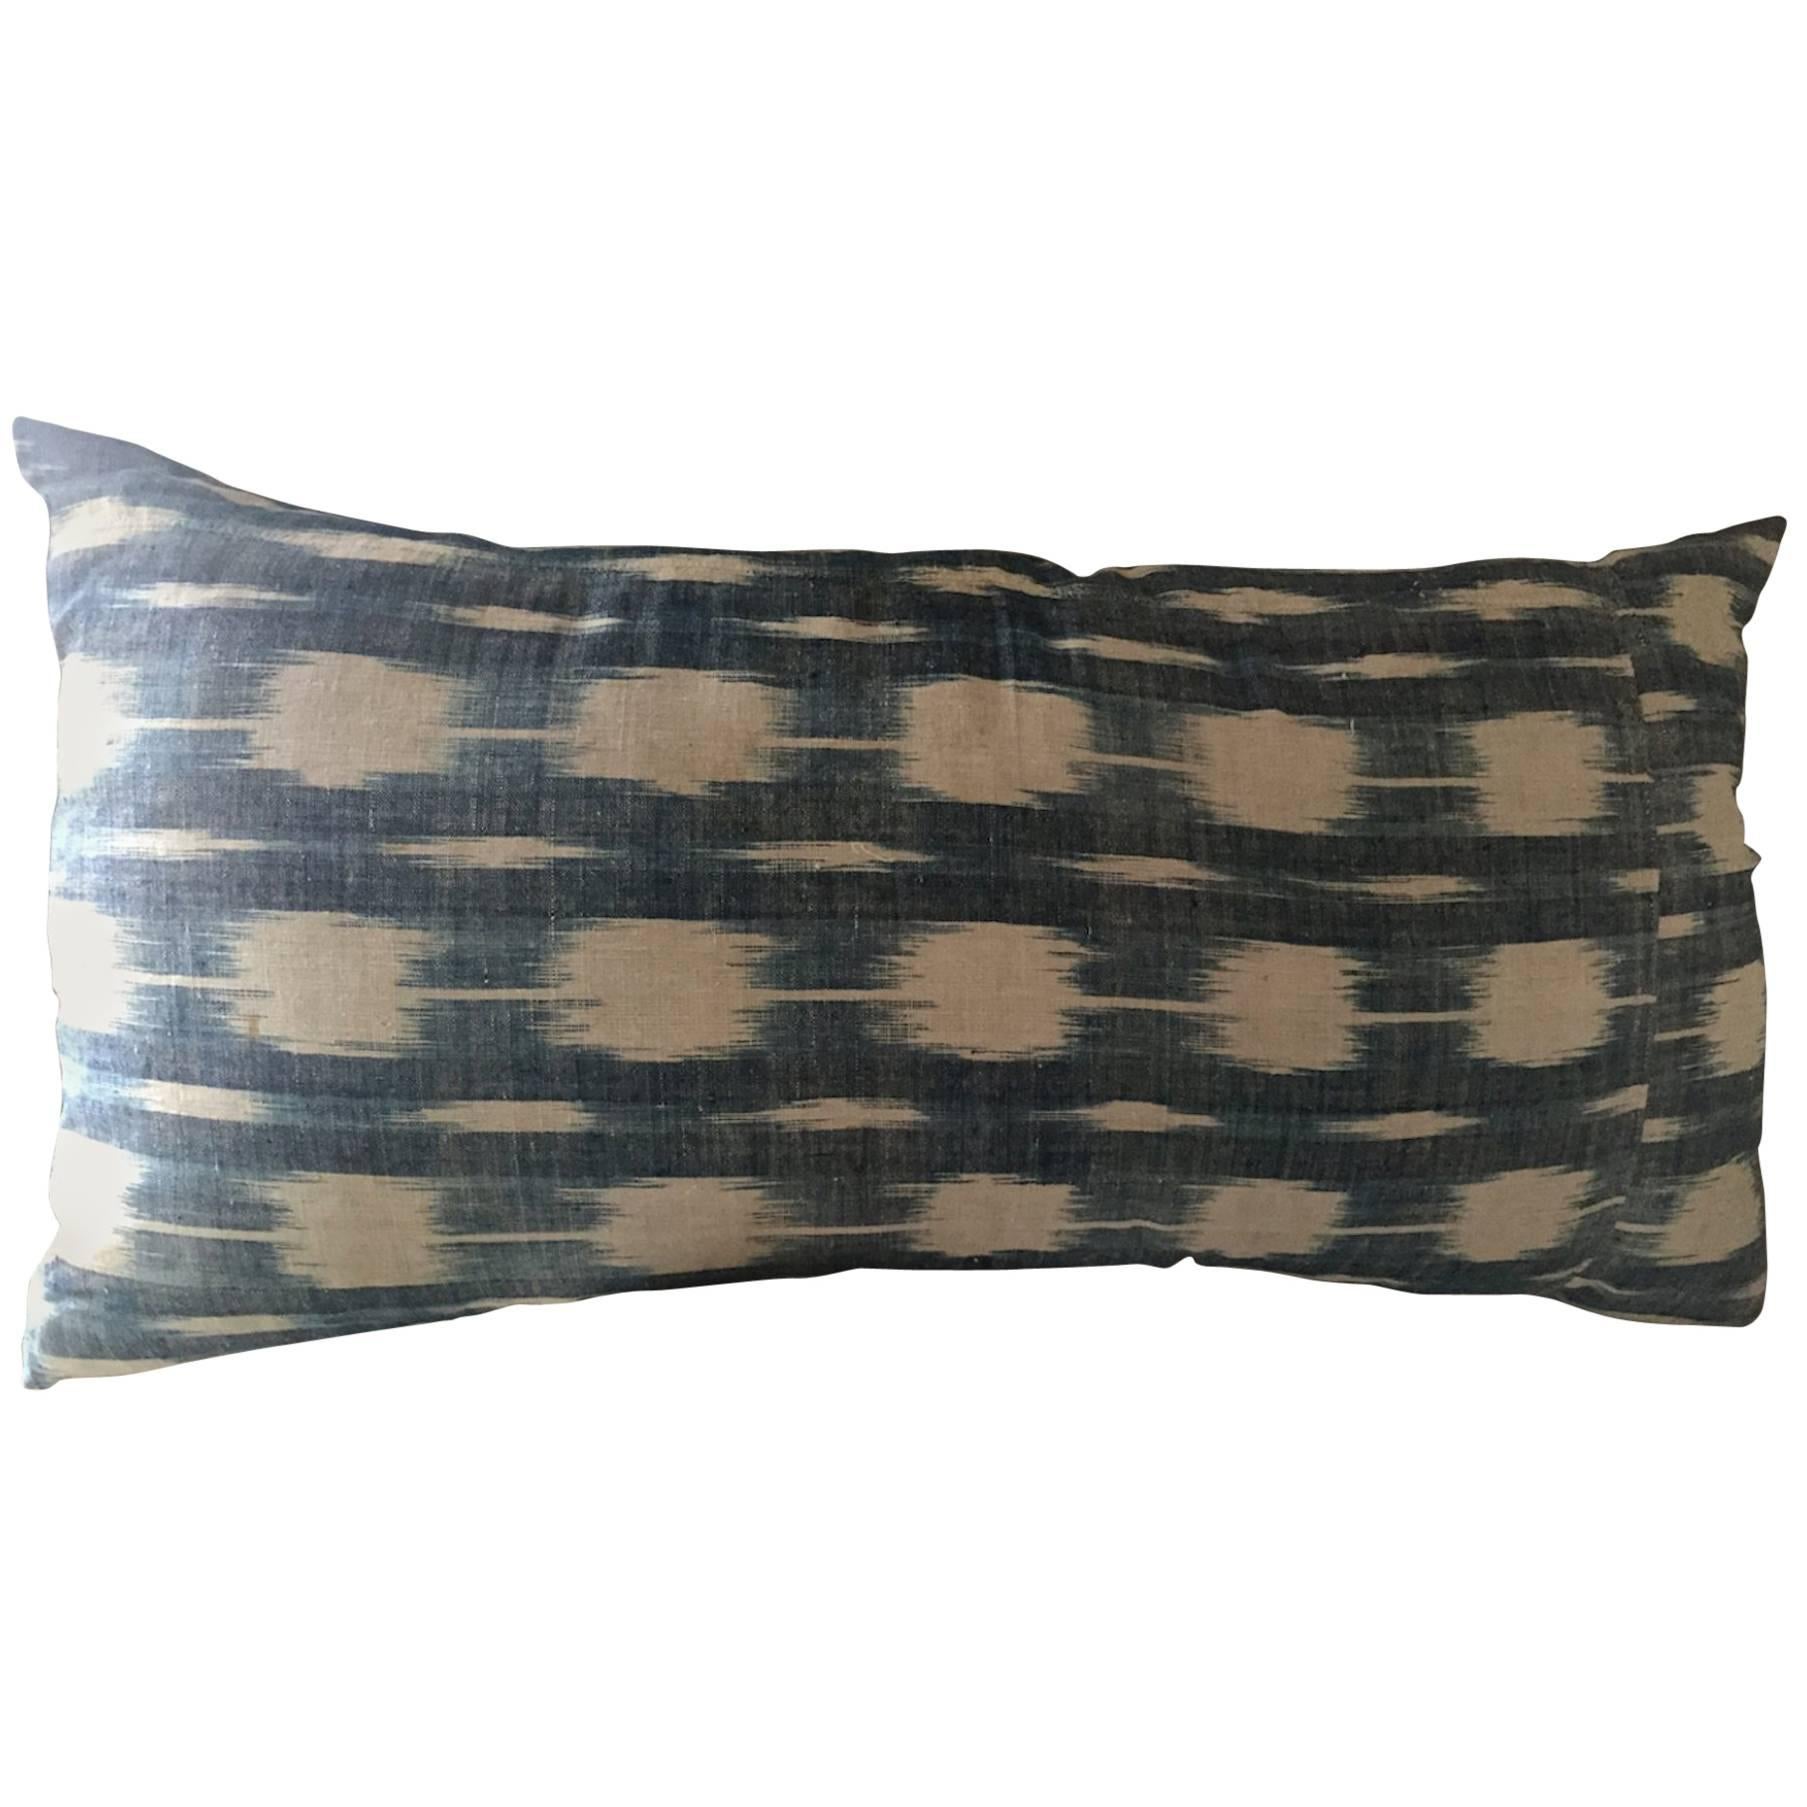 Mid-19th Century French Home Spun Indigo Dyed Ikat Pillow #11 For Sale